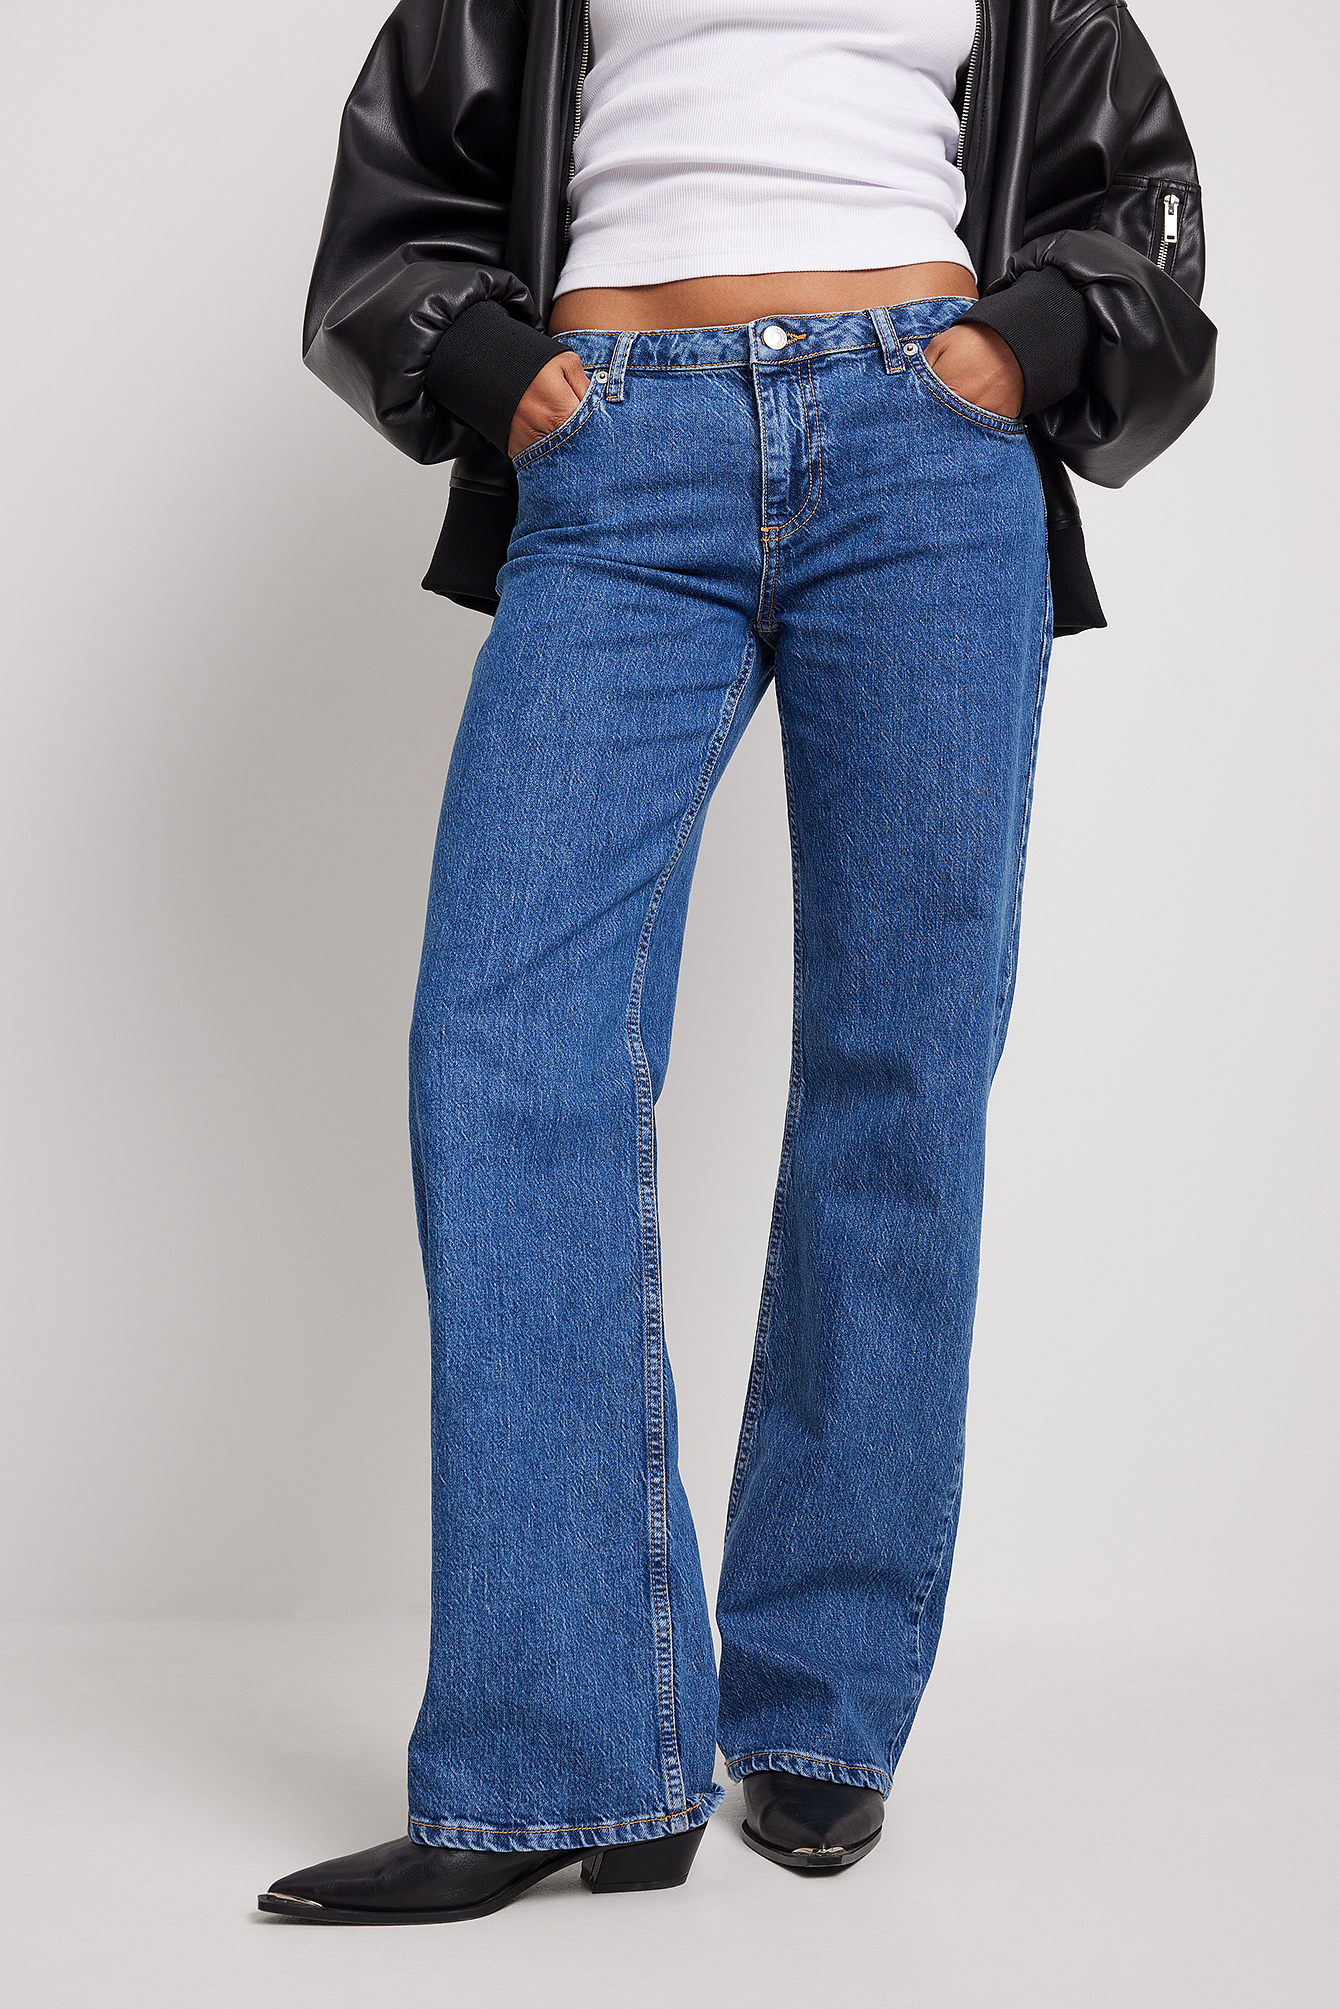 Mode Jeans Jeans taille basse People’s Liberation People\u2019s Liberation Jeans taille basse bleu style d\u00e9contract\u00e9 